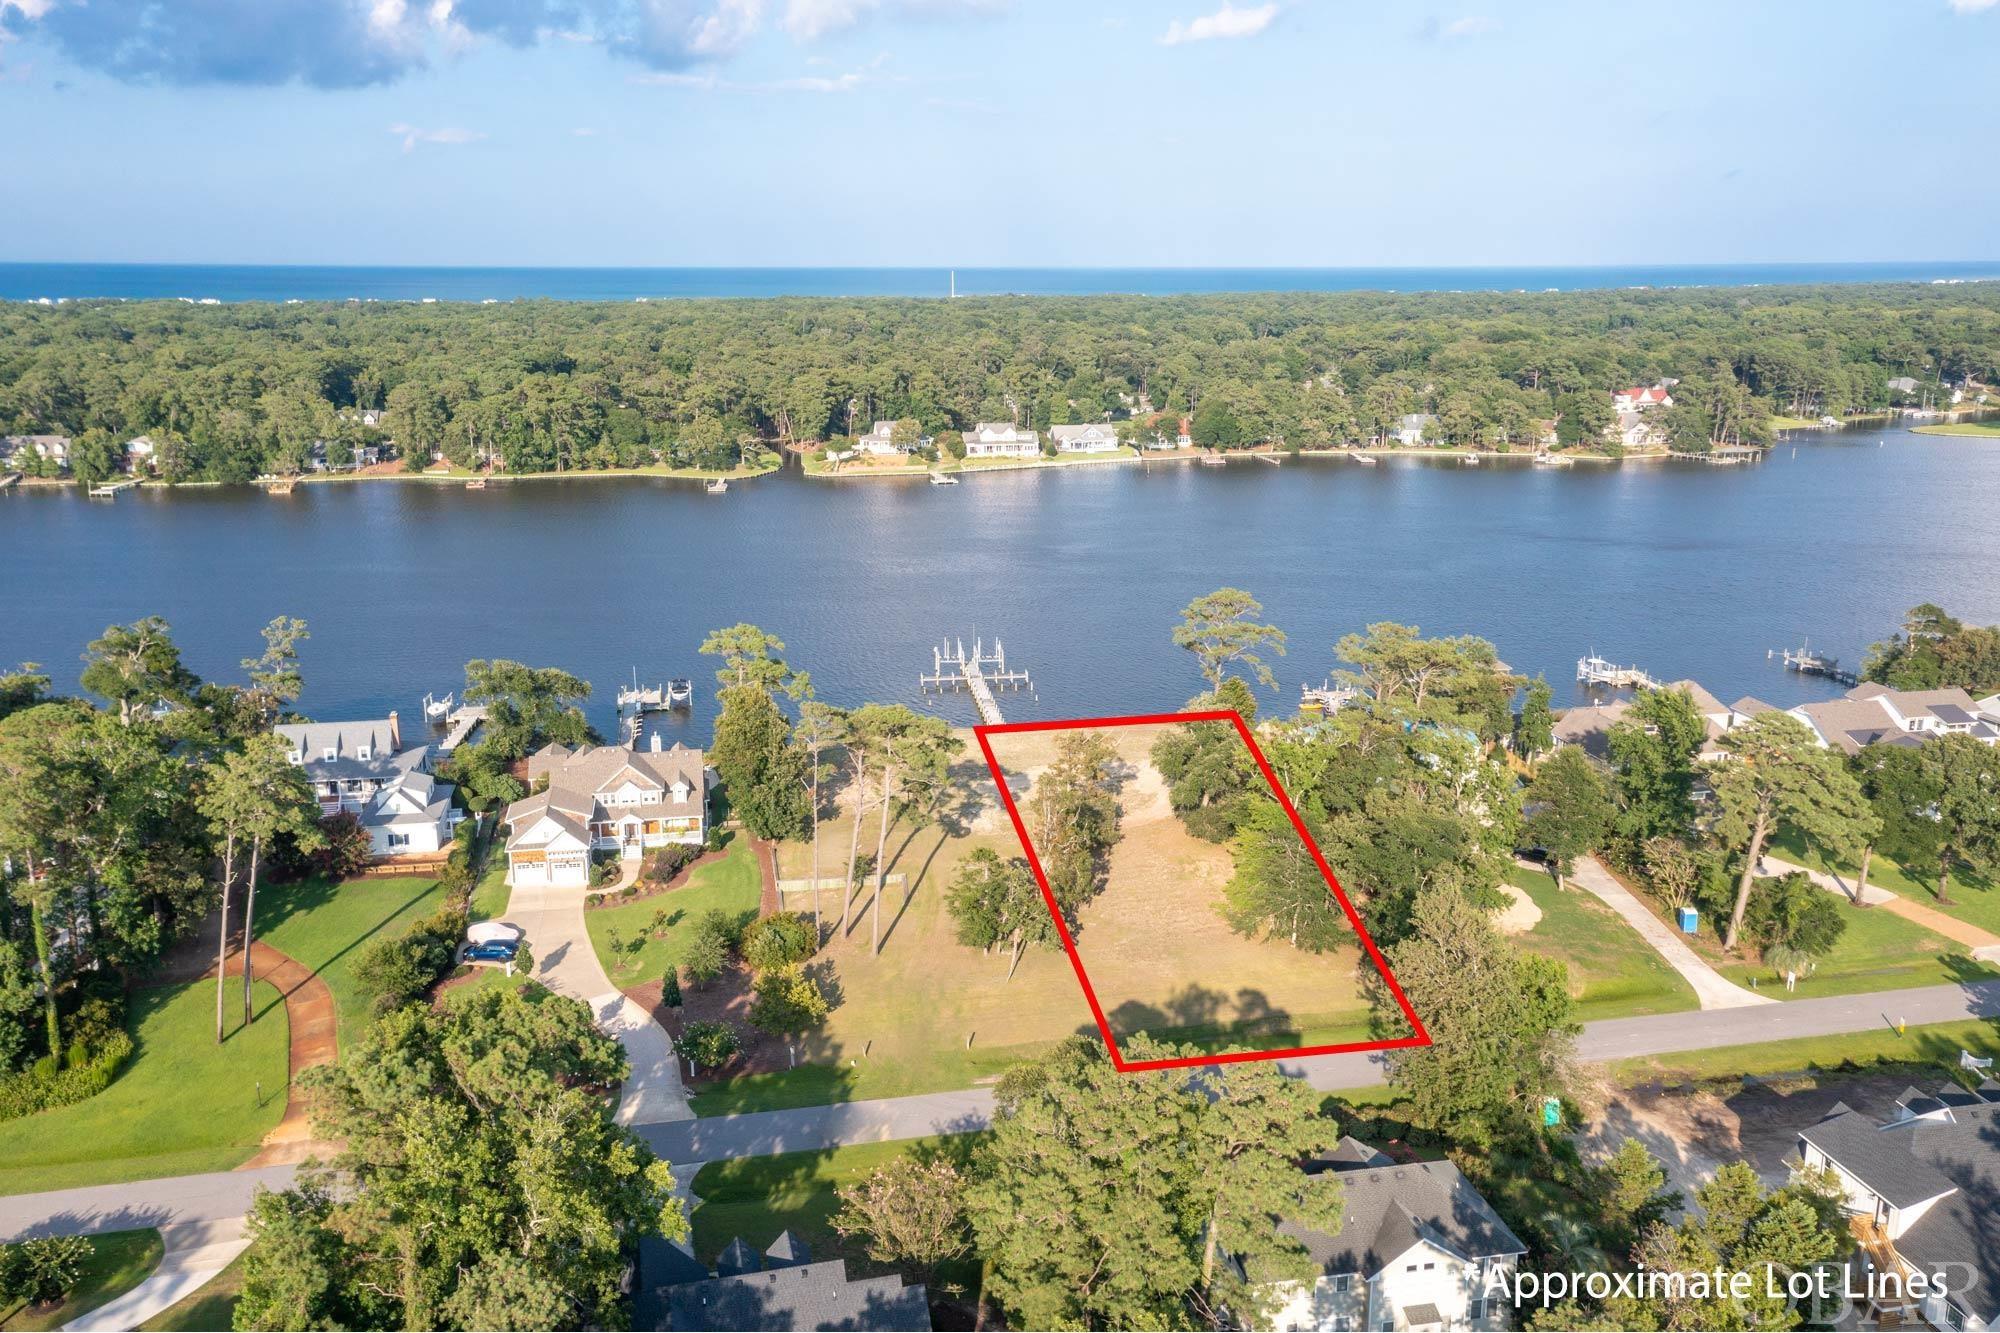 Located in the esteemed guard-gated community of Martins Point on the Outer Banks, this build-ready parcel with appx. 100 feet of water frontage sets the stage for the home of your dreams. Offering breathtaking vistas that stretch across the Jean Guite Creek, this approximately 30,000 square foot lot is one of the last available vacant lands in this peninsula community.  To top it off, it holds a 6’ wide by 125’ long Ipe Pier that includes 2 large boat lifts, mooring pilings, two 25’ finger piers, water service, and electric service.  The heavy duty, double reinforced vinyl bulkhead has been constructed with the best craftsmanship and materials available.  The ground elevation is estimated to be 10’, and the property is cleared and maintained.  Residents of Martins Point can take advantage of the superb amenities including a marina, boat ramp and dock, park, and 24-hour guard security.  Presenting an unrivaled lifestyle and location near the miles of Outer Banks beaches, this offering is not one to be missed. The adjoining lot is also available – see MLS 119788.